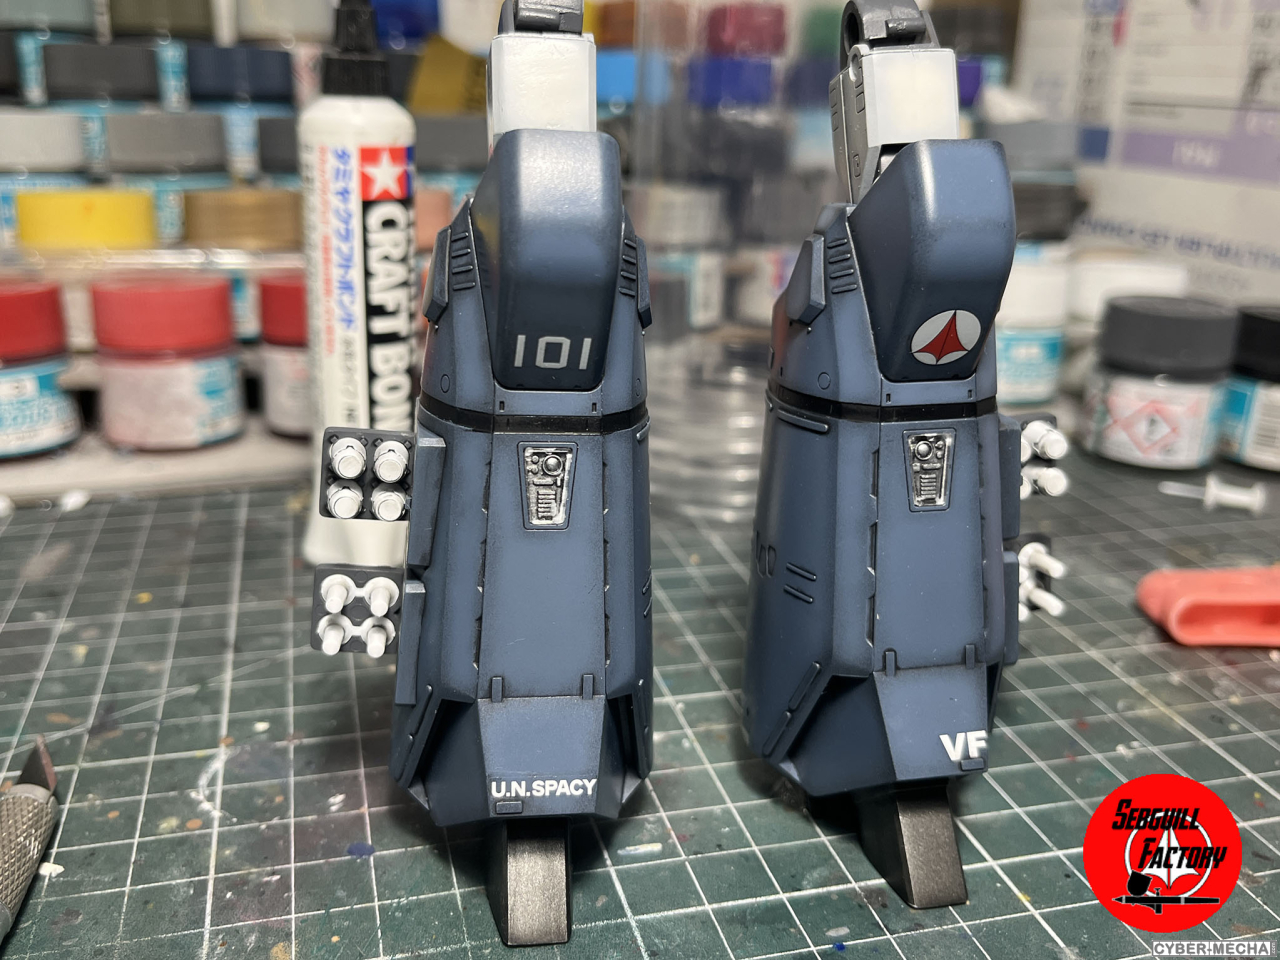 [Hasegawa] 1/72 - VF-1j Armored valkyrie  - Page 2 1706975933